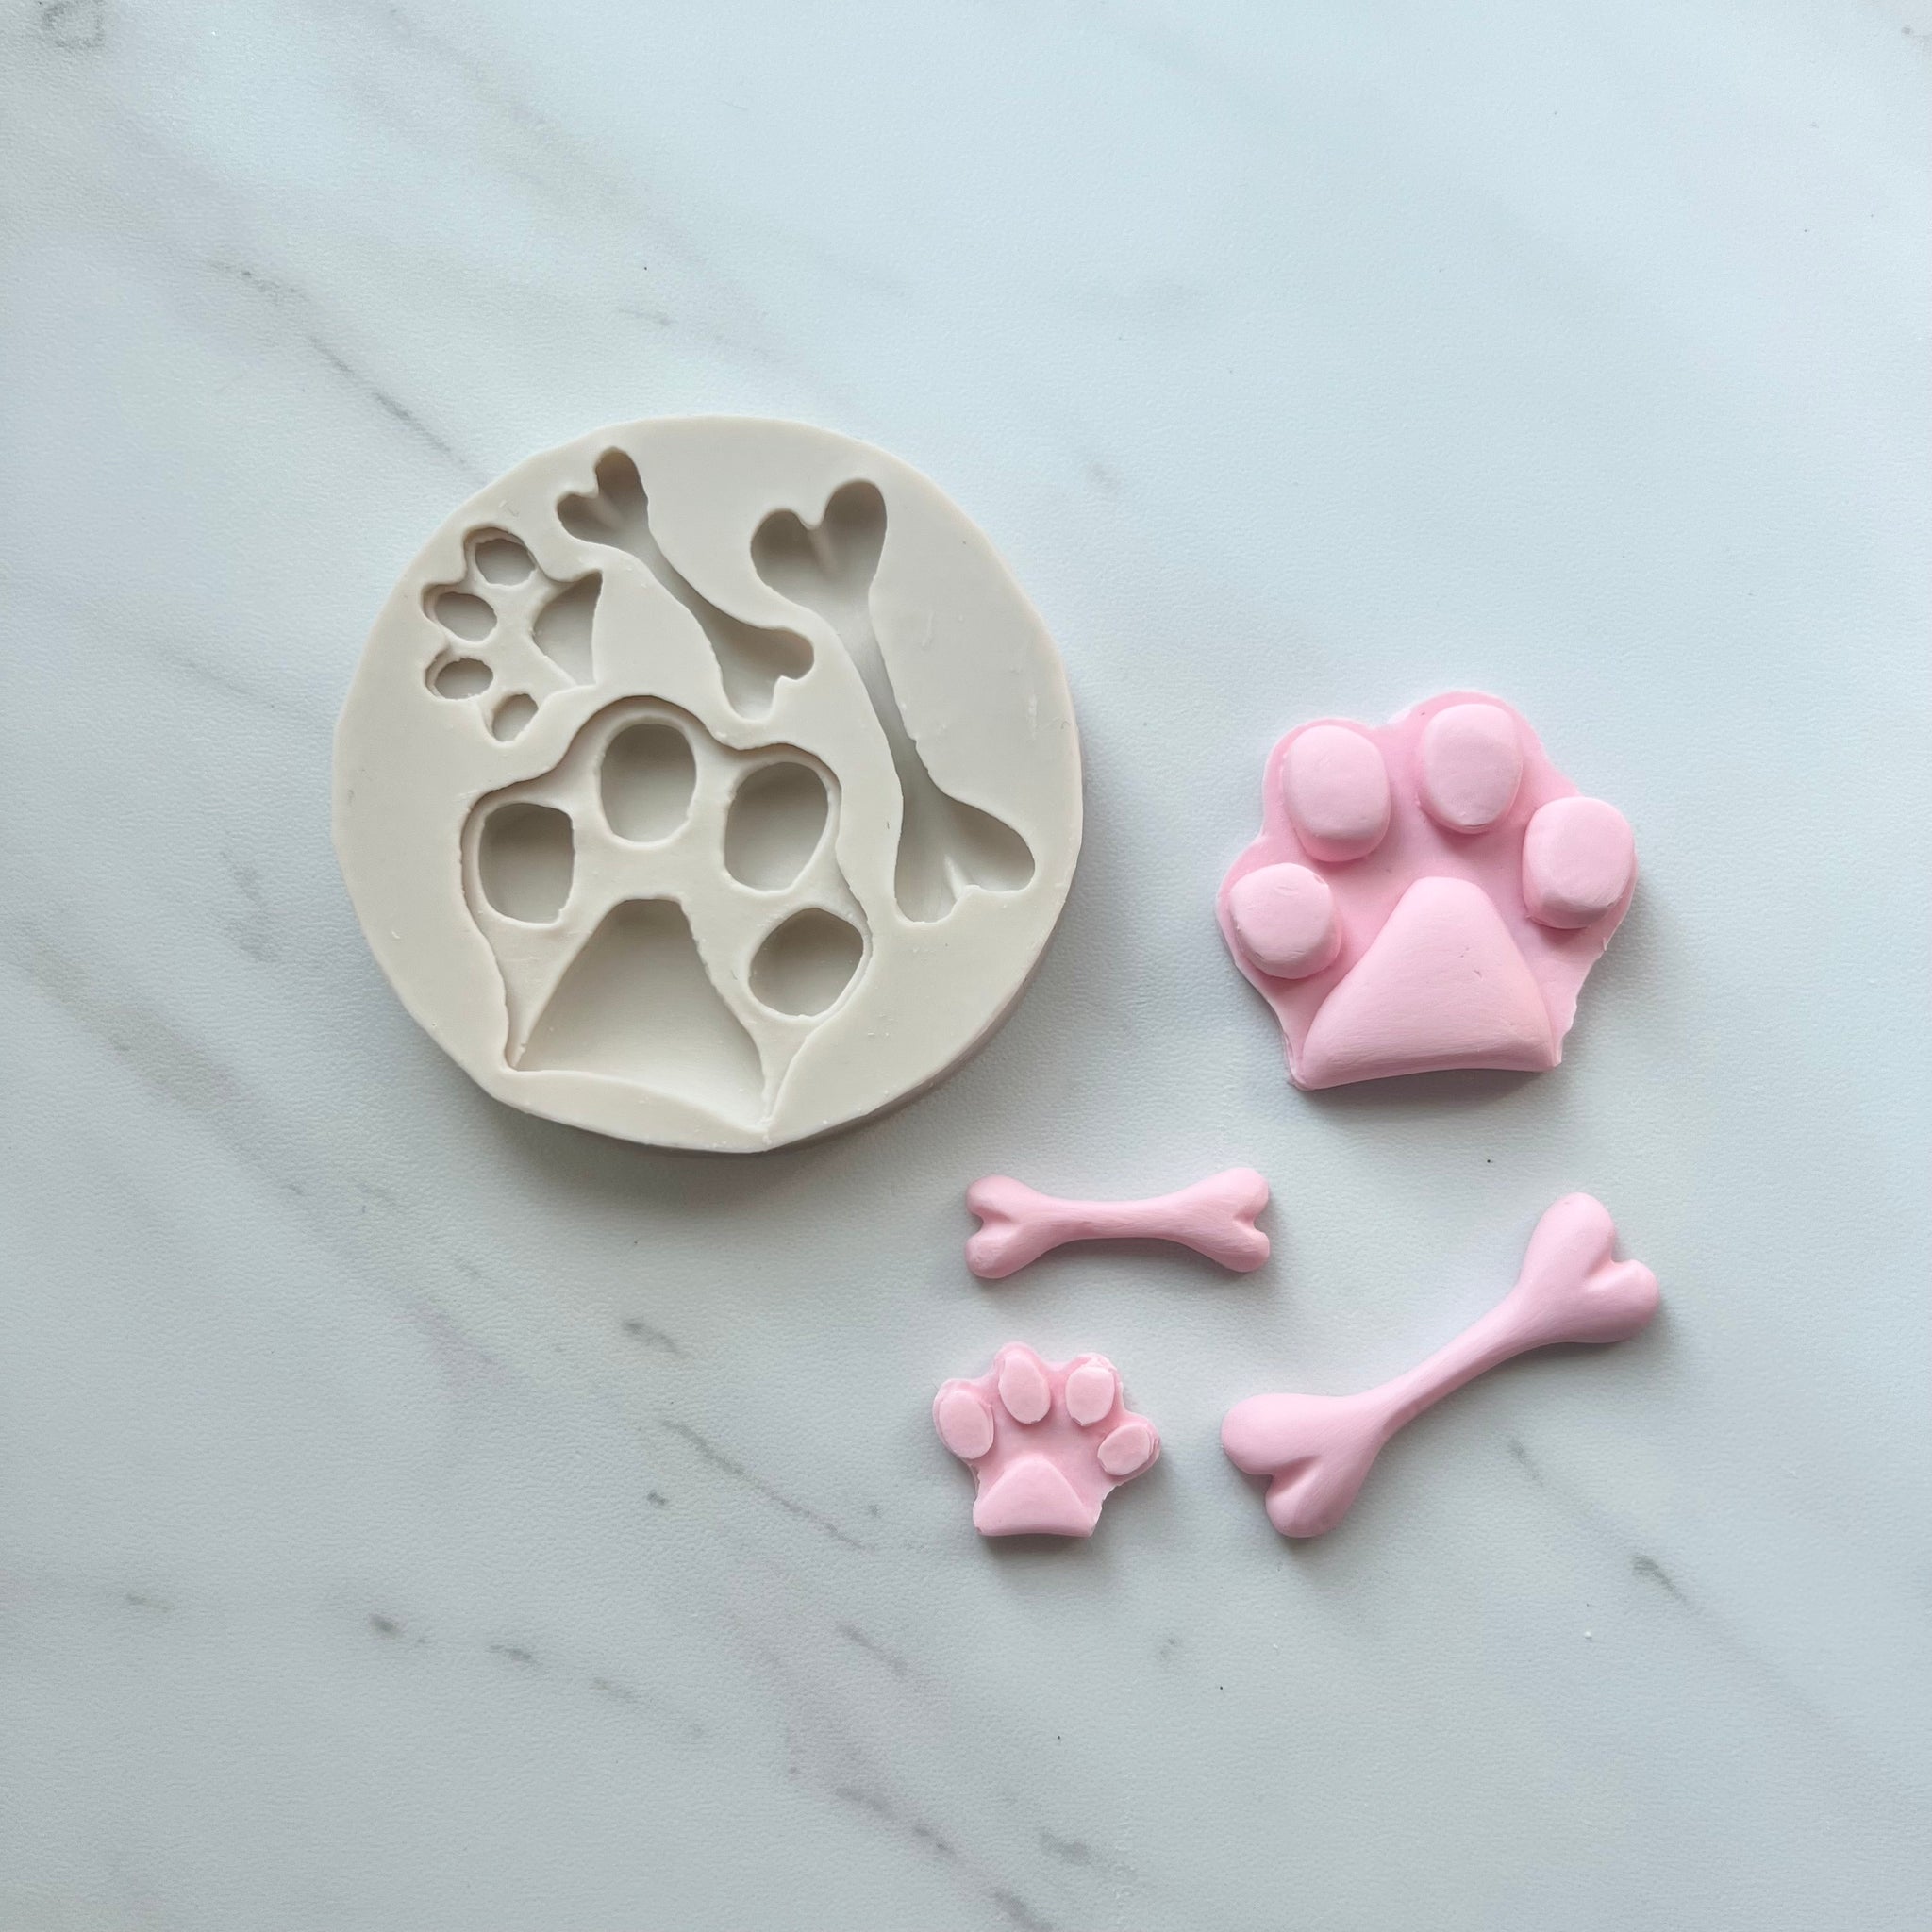 PAWS AND BONES MOLD